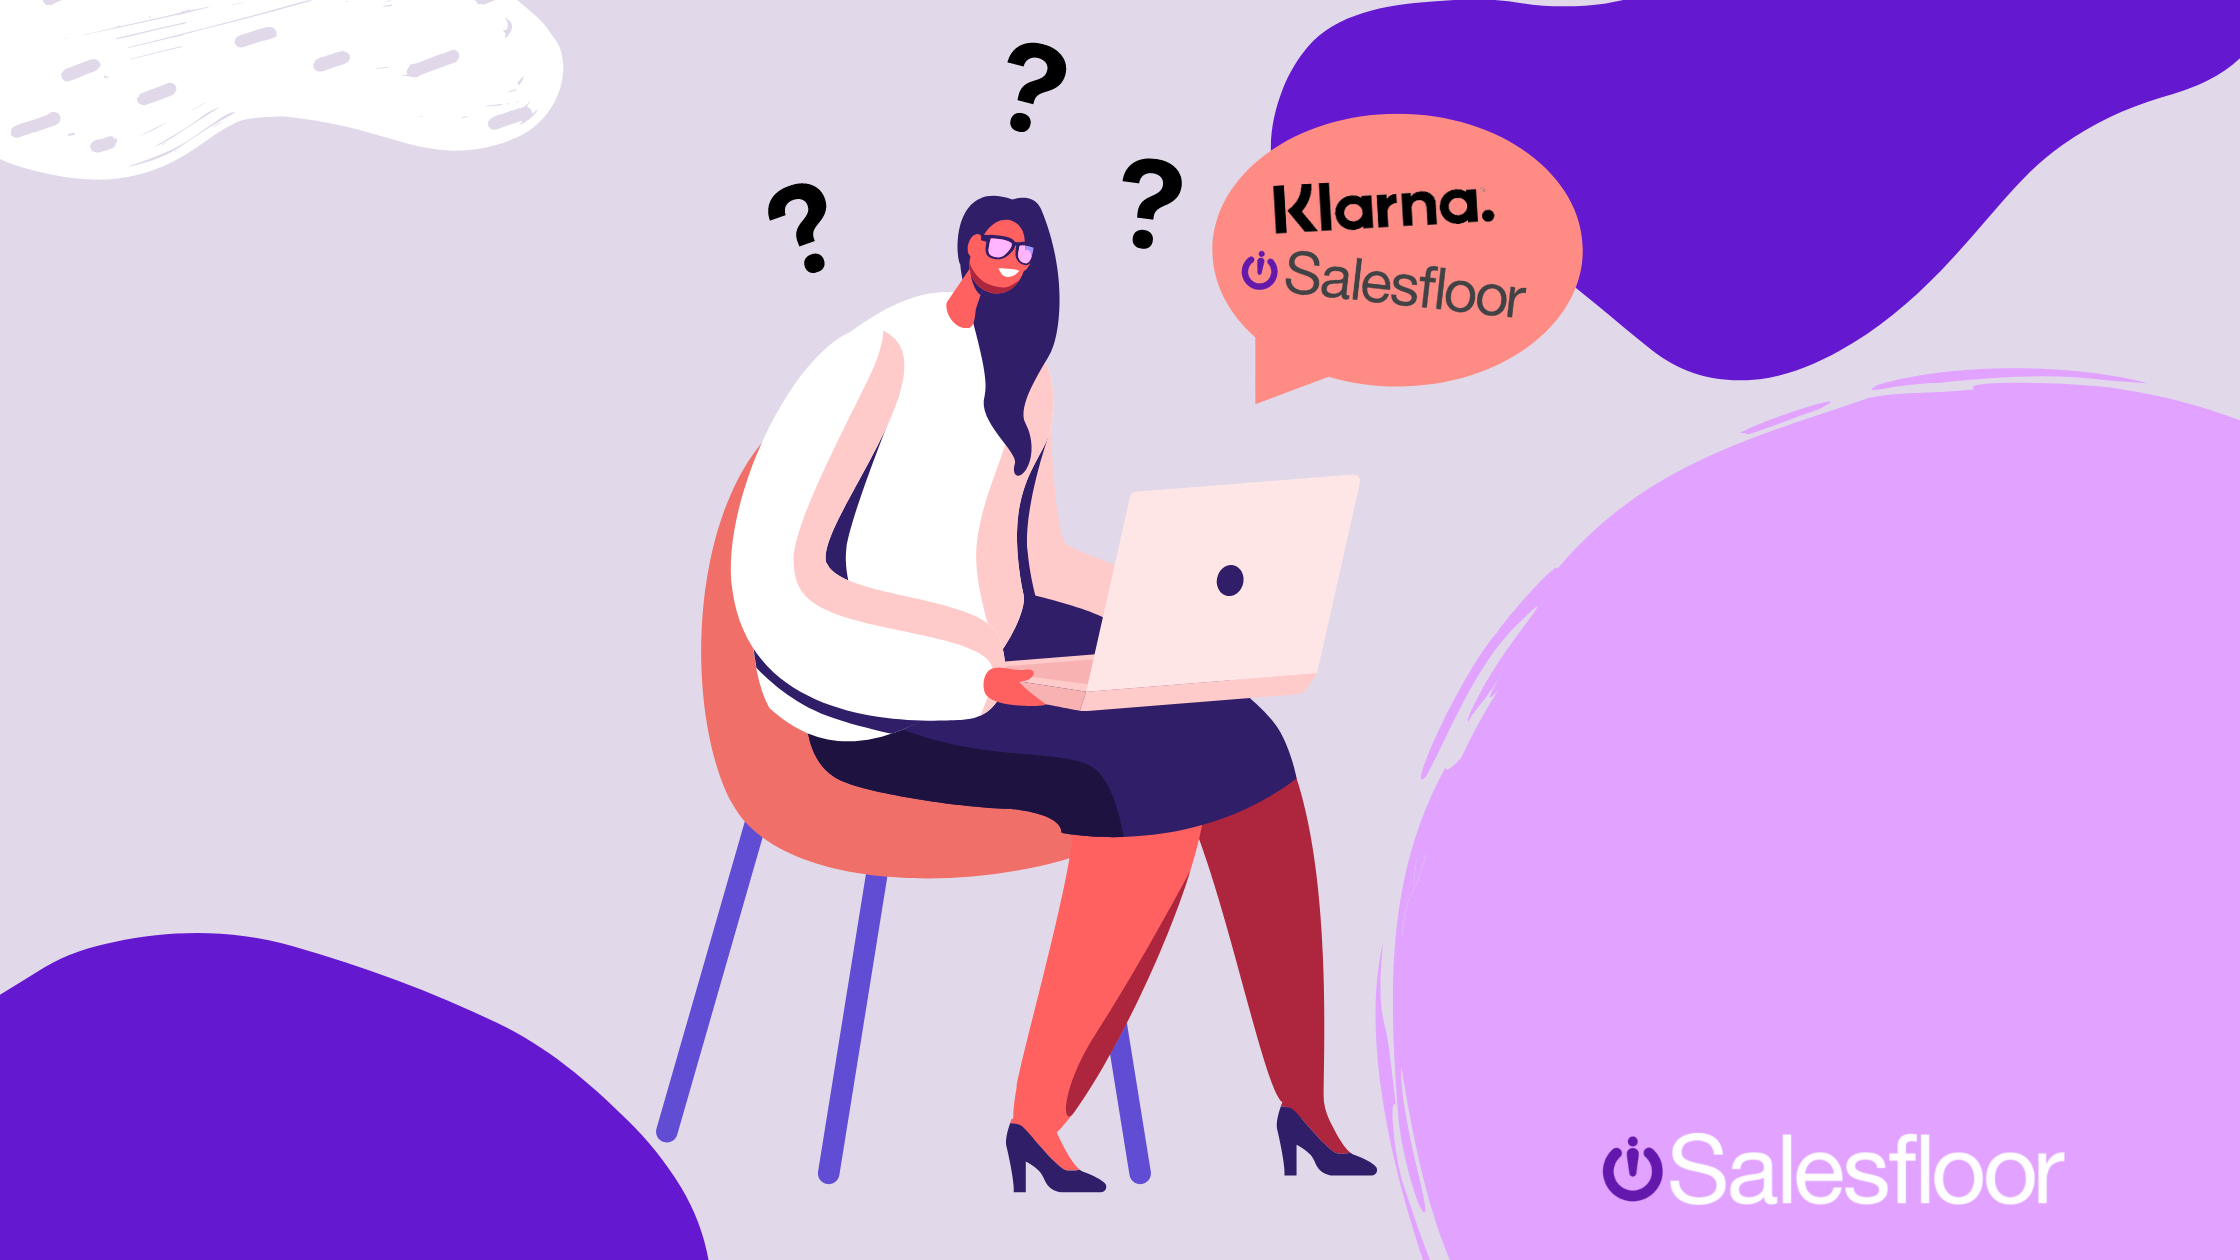 How to Evaluate Salesfloor as an Alternative to Klarna Virtual Shopping